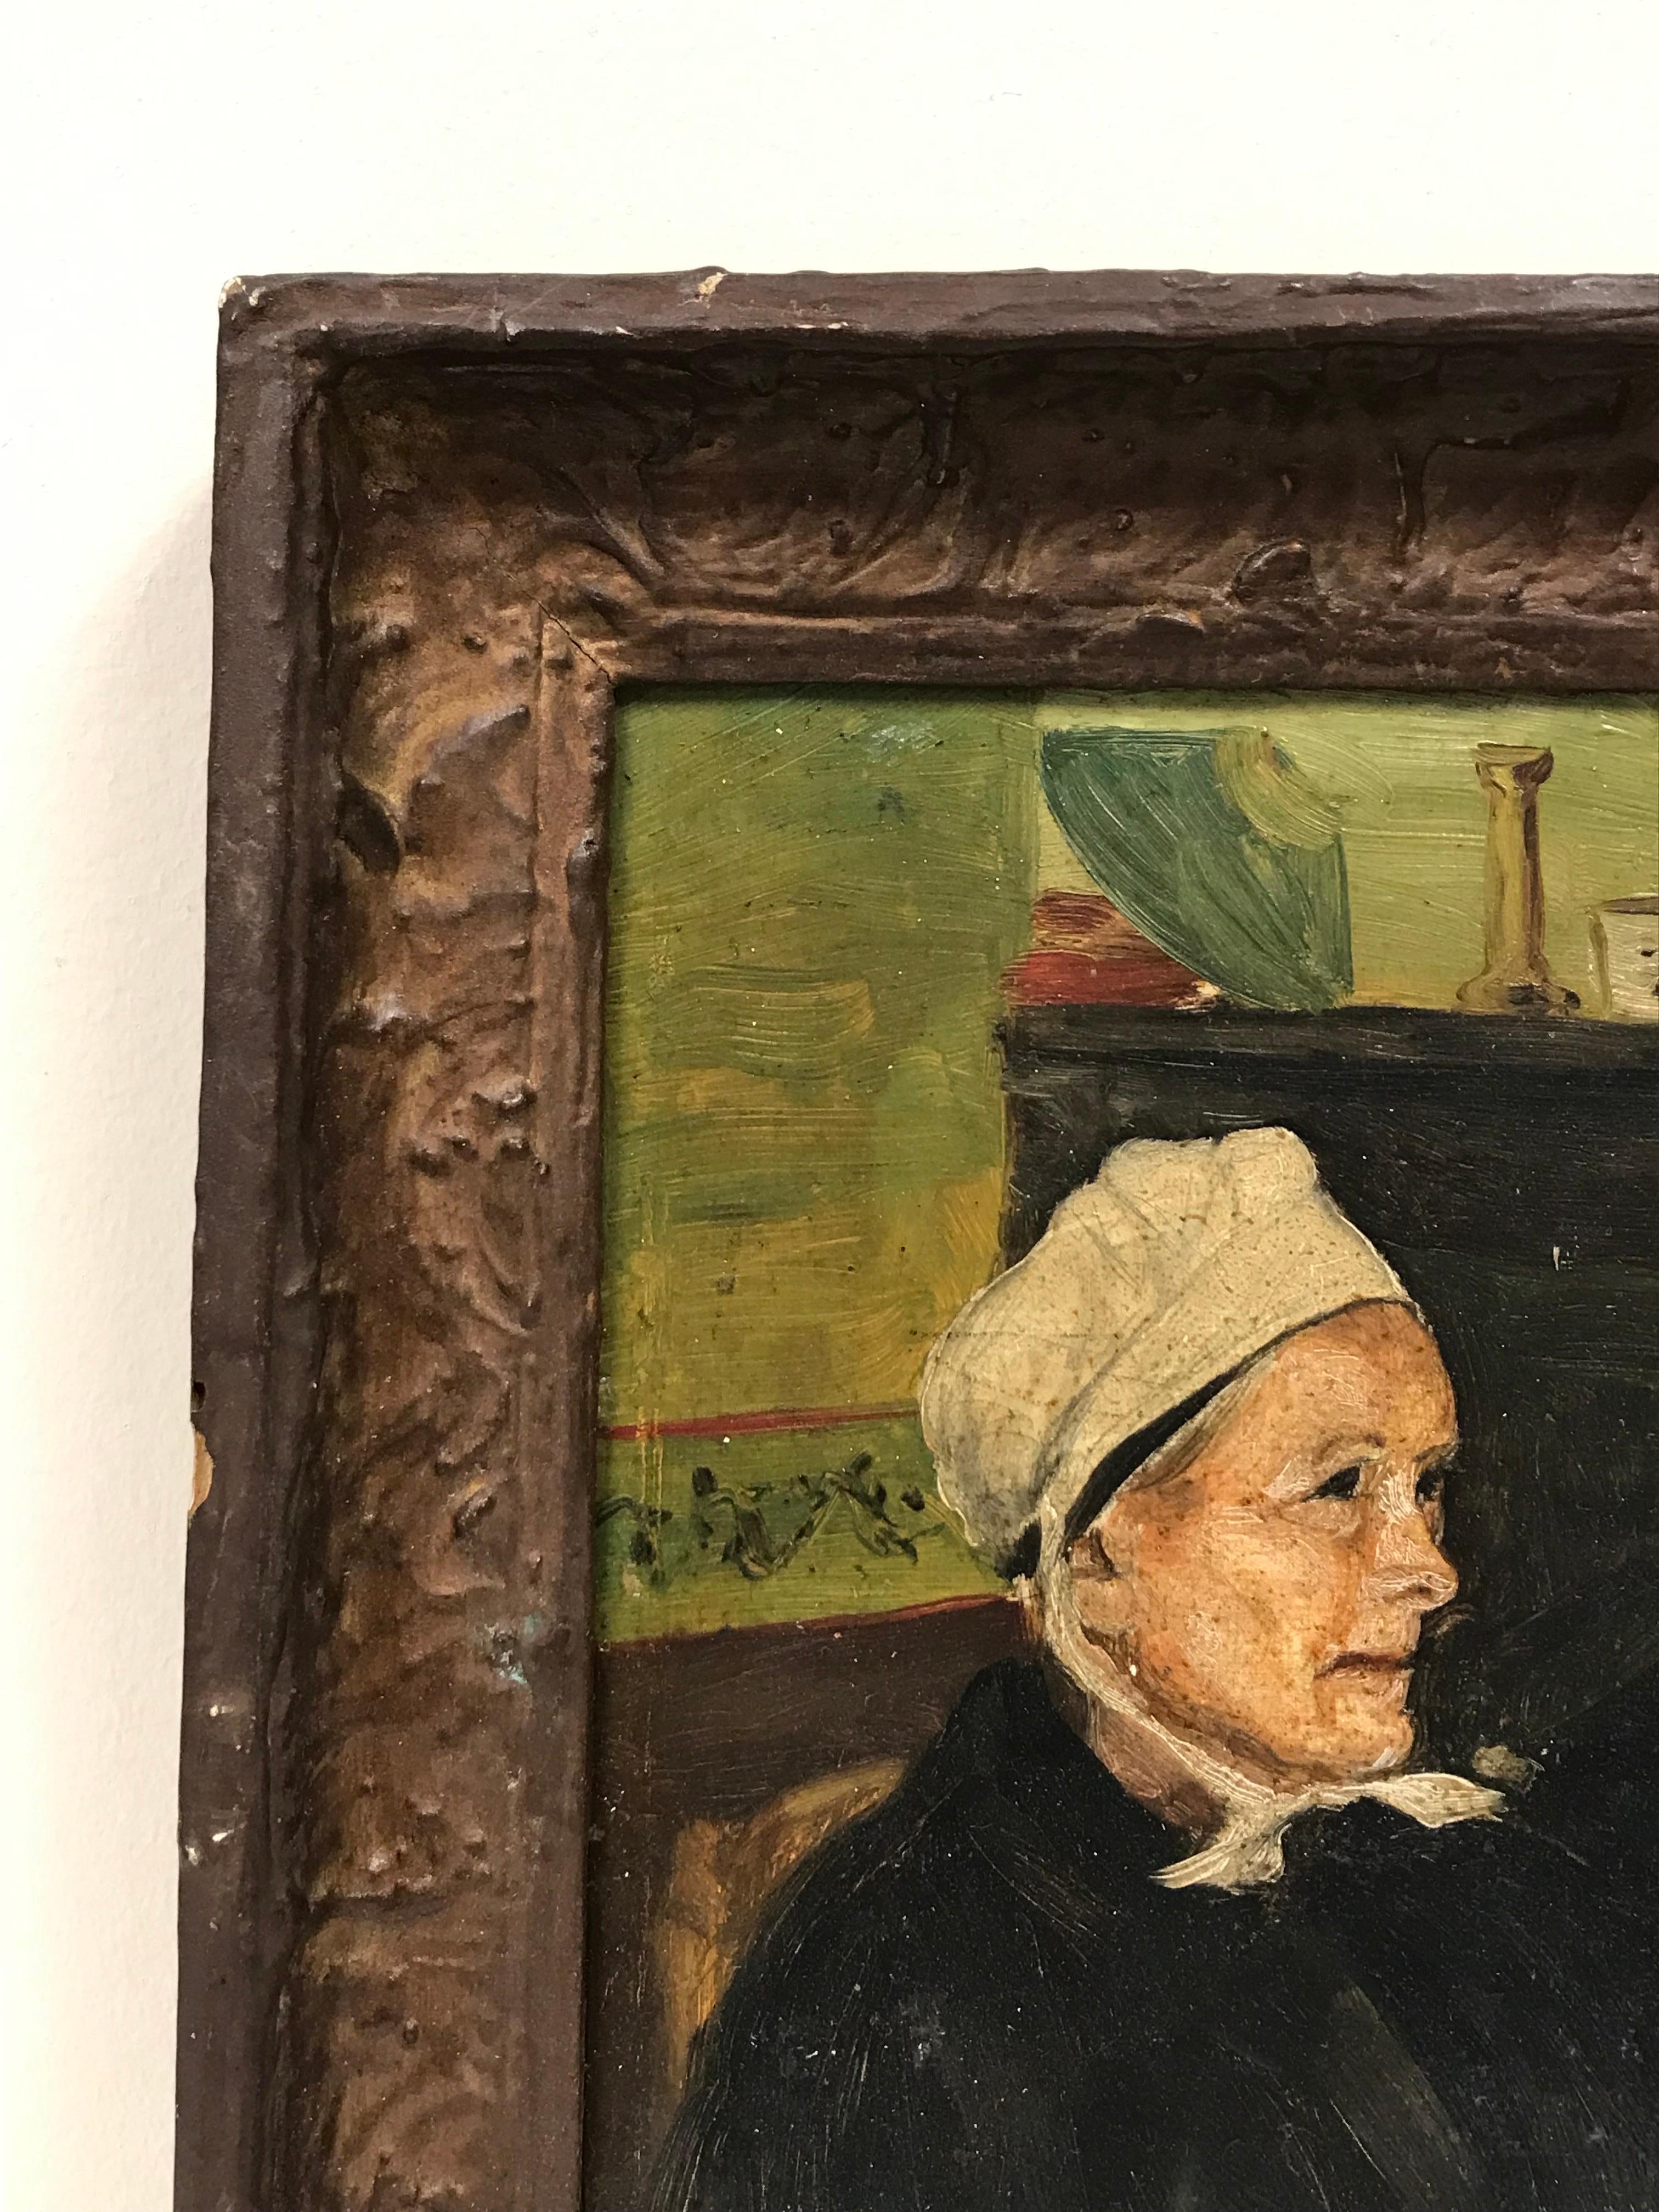 Artist/ School: Dutch School, early 20th century

Title: Portrait of a Woman in a room

Medium:  oil on board, framed

framed: 11.5 x 9.5 inches
board: 9 x 6.5 inches

Provenance: private collection, France

Condition: The painting is in overall